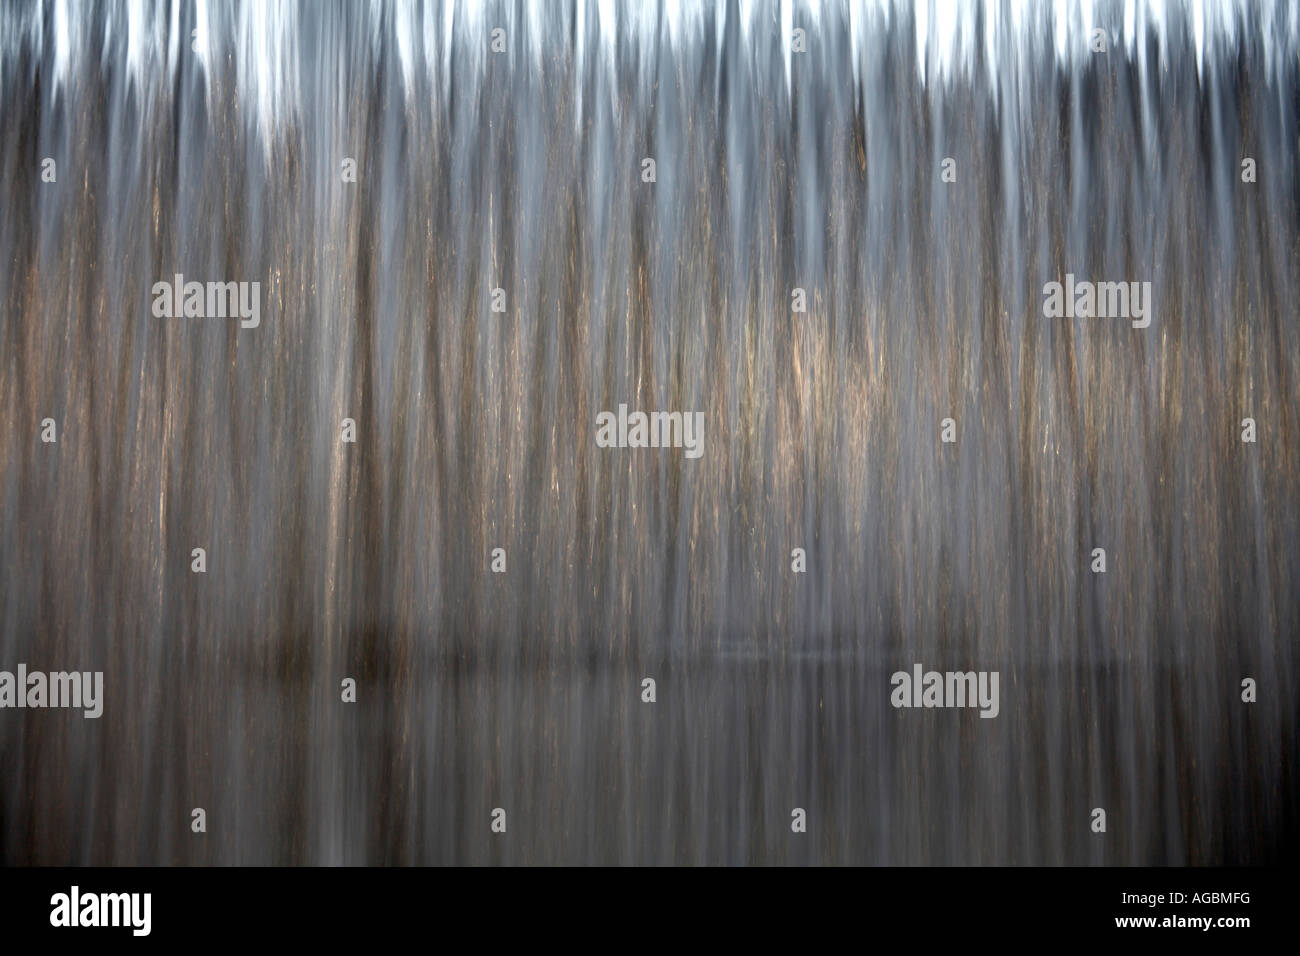 Abstract image of rushing water in Sydney New South Wales NSW Australia Stock Photo